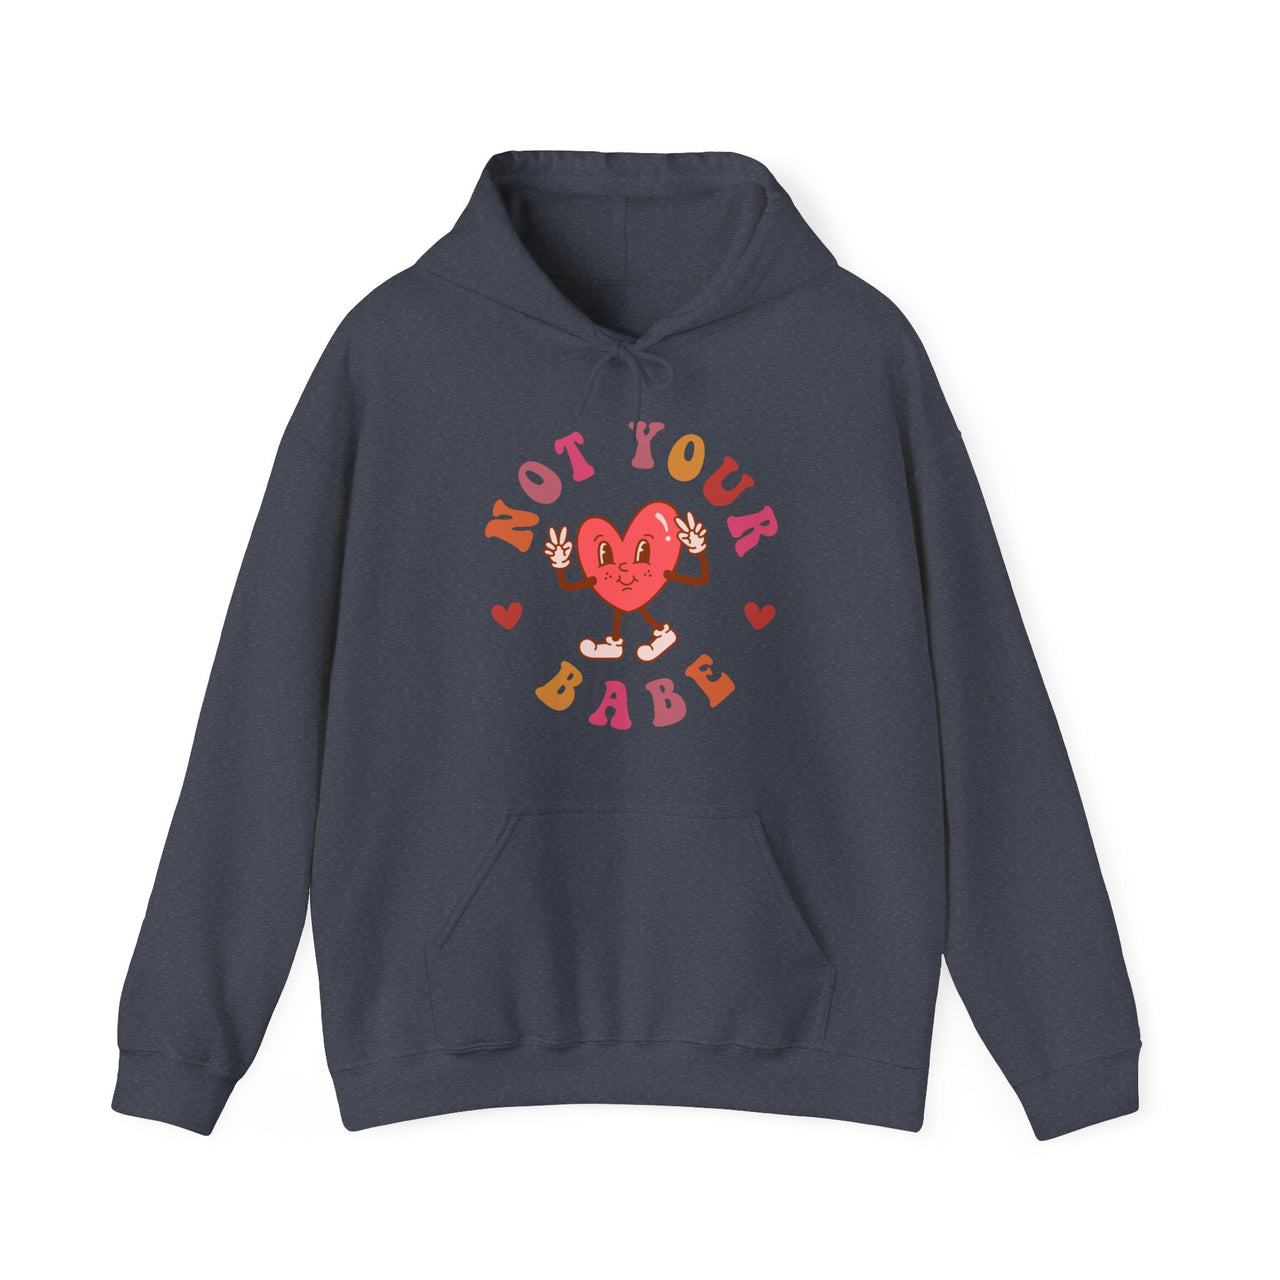 Not Your Babe Cozy Valentines Day Hoodie